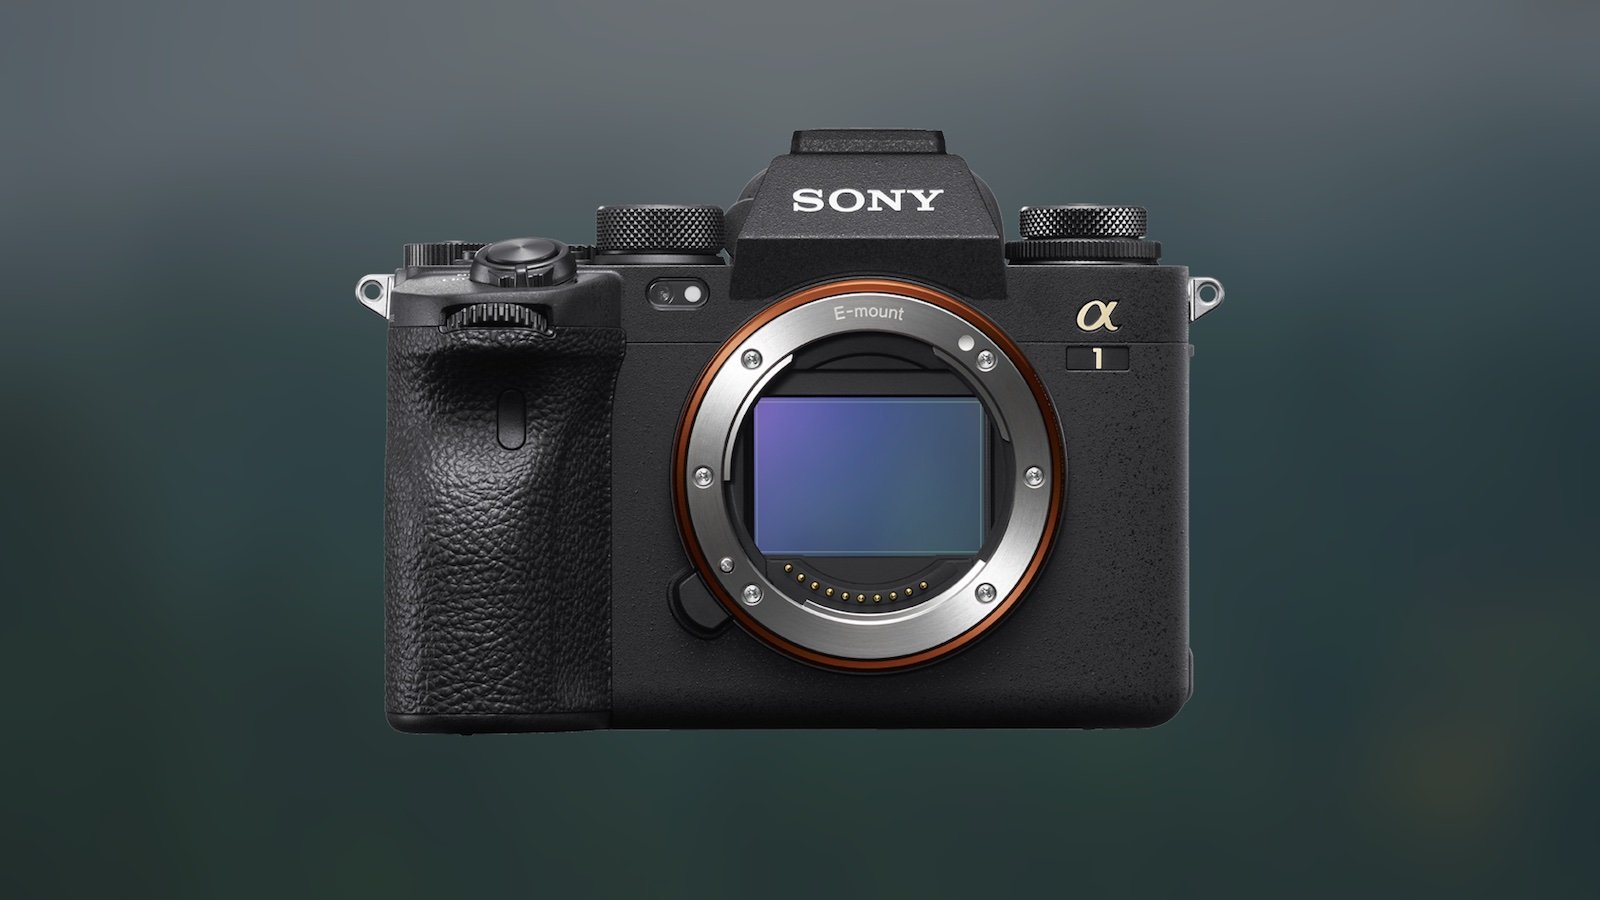 Sony α1 interchangeable lens camera offers high resolution and fast speed